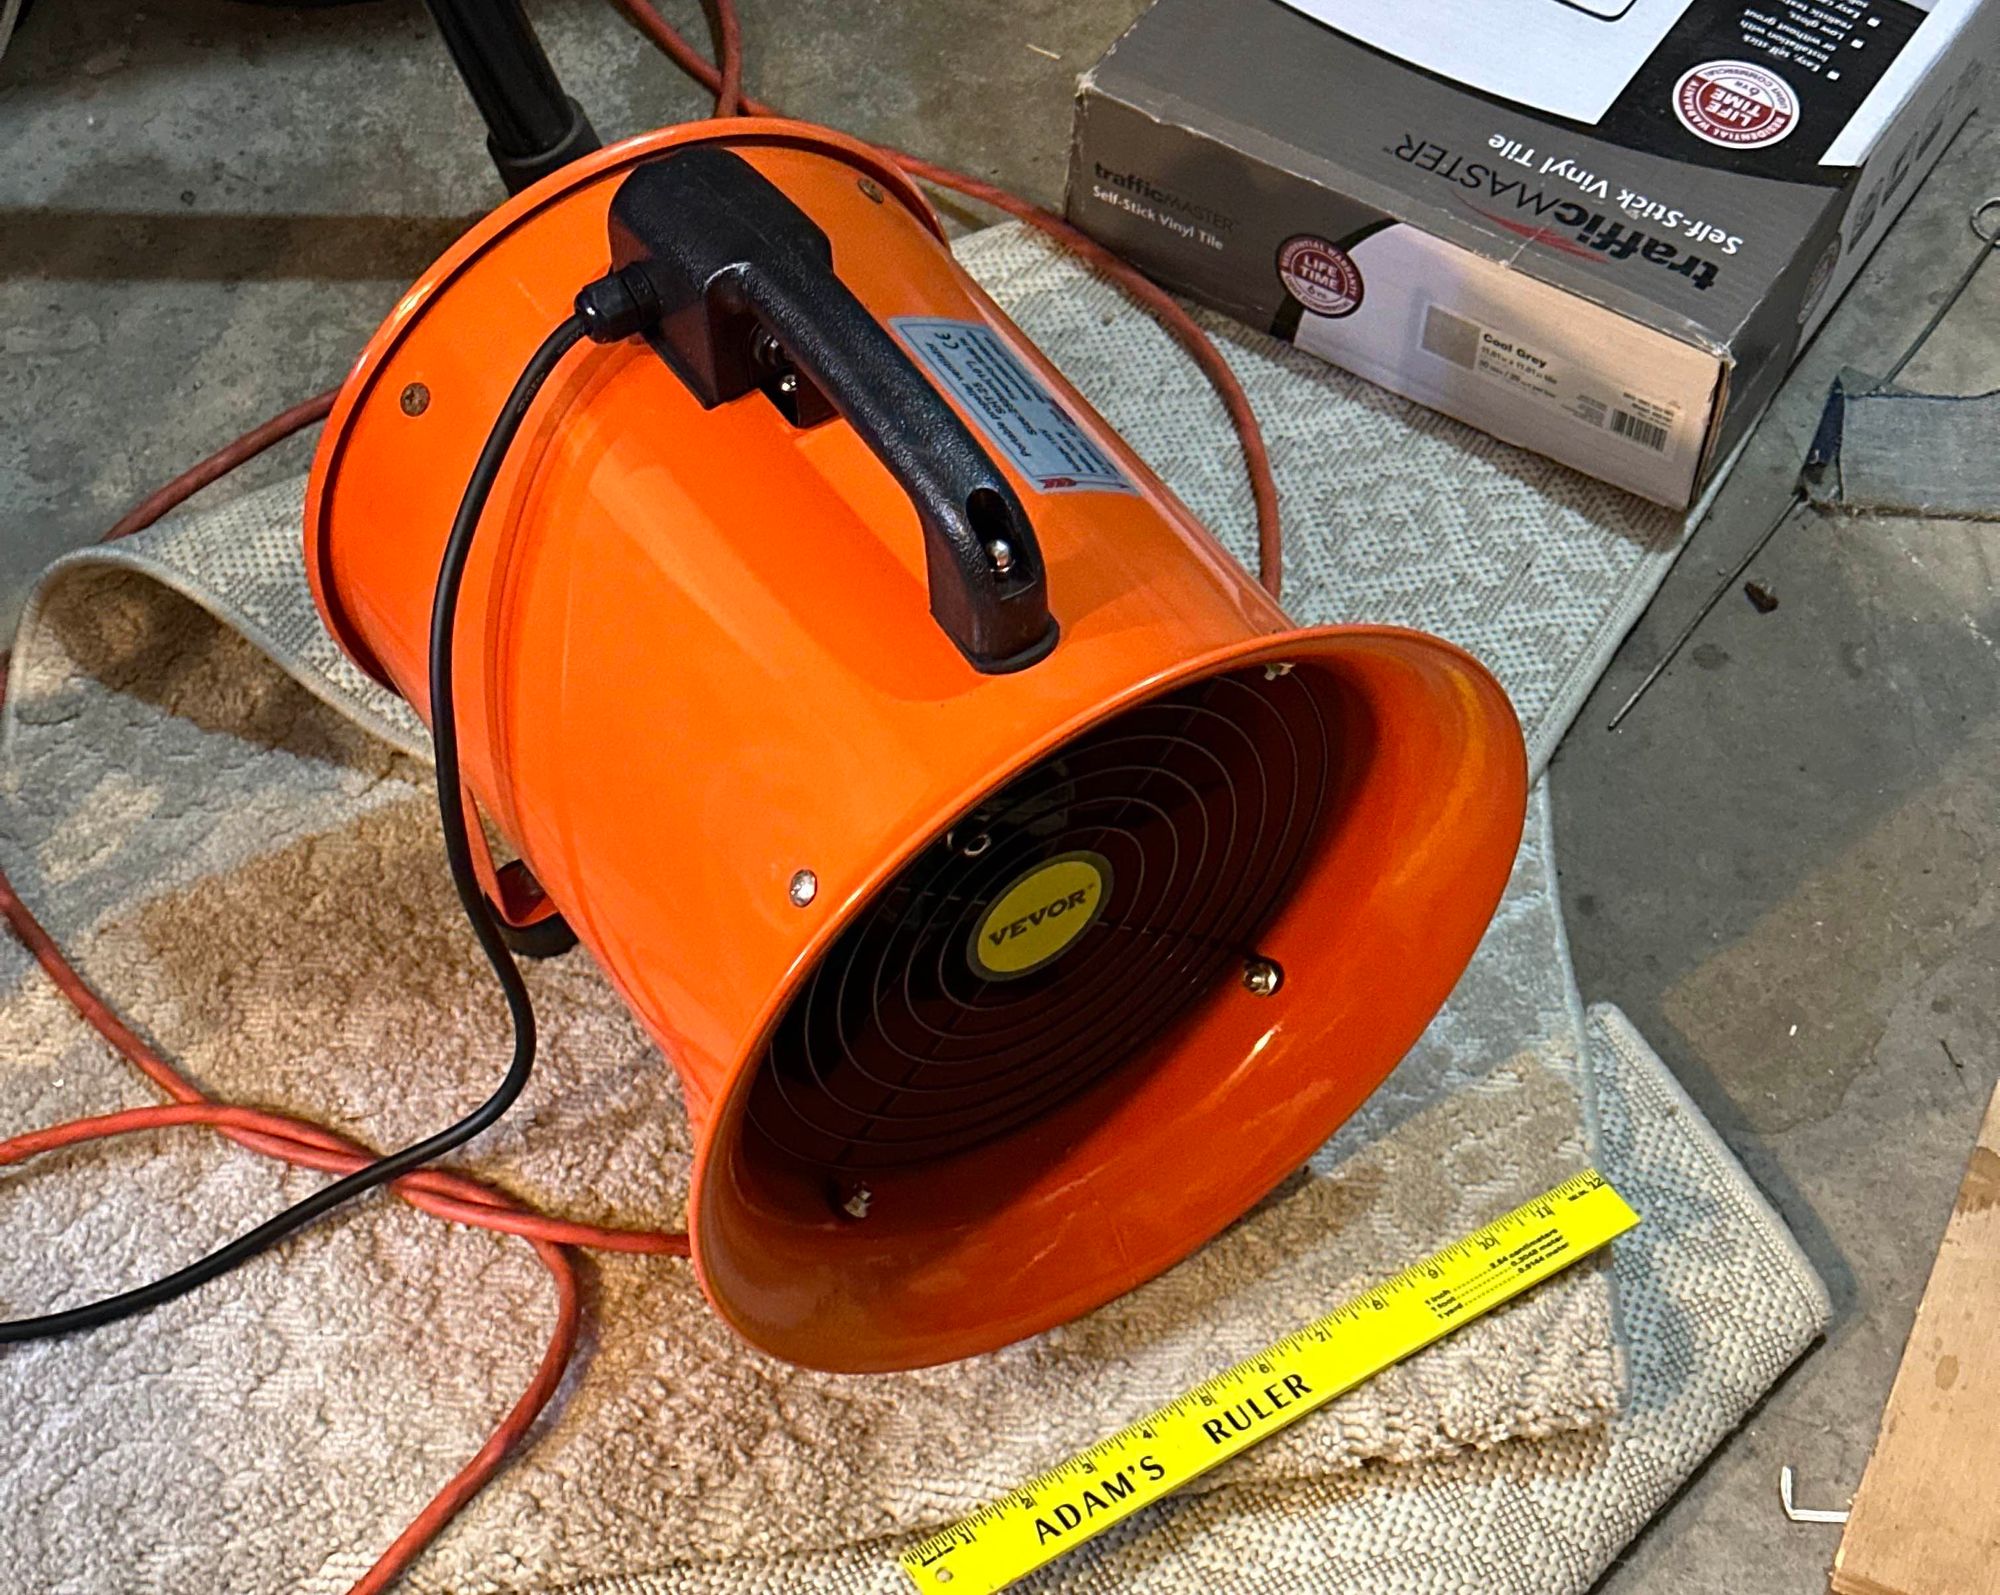 A large orange blower, with a ruler for scale showing the intake of the blower to be about a foot in diameter.